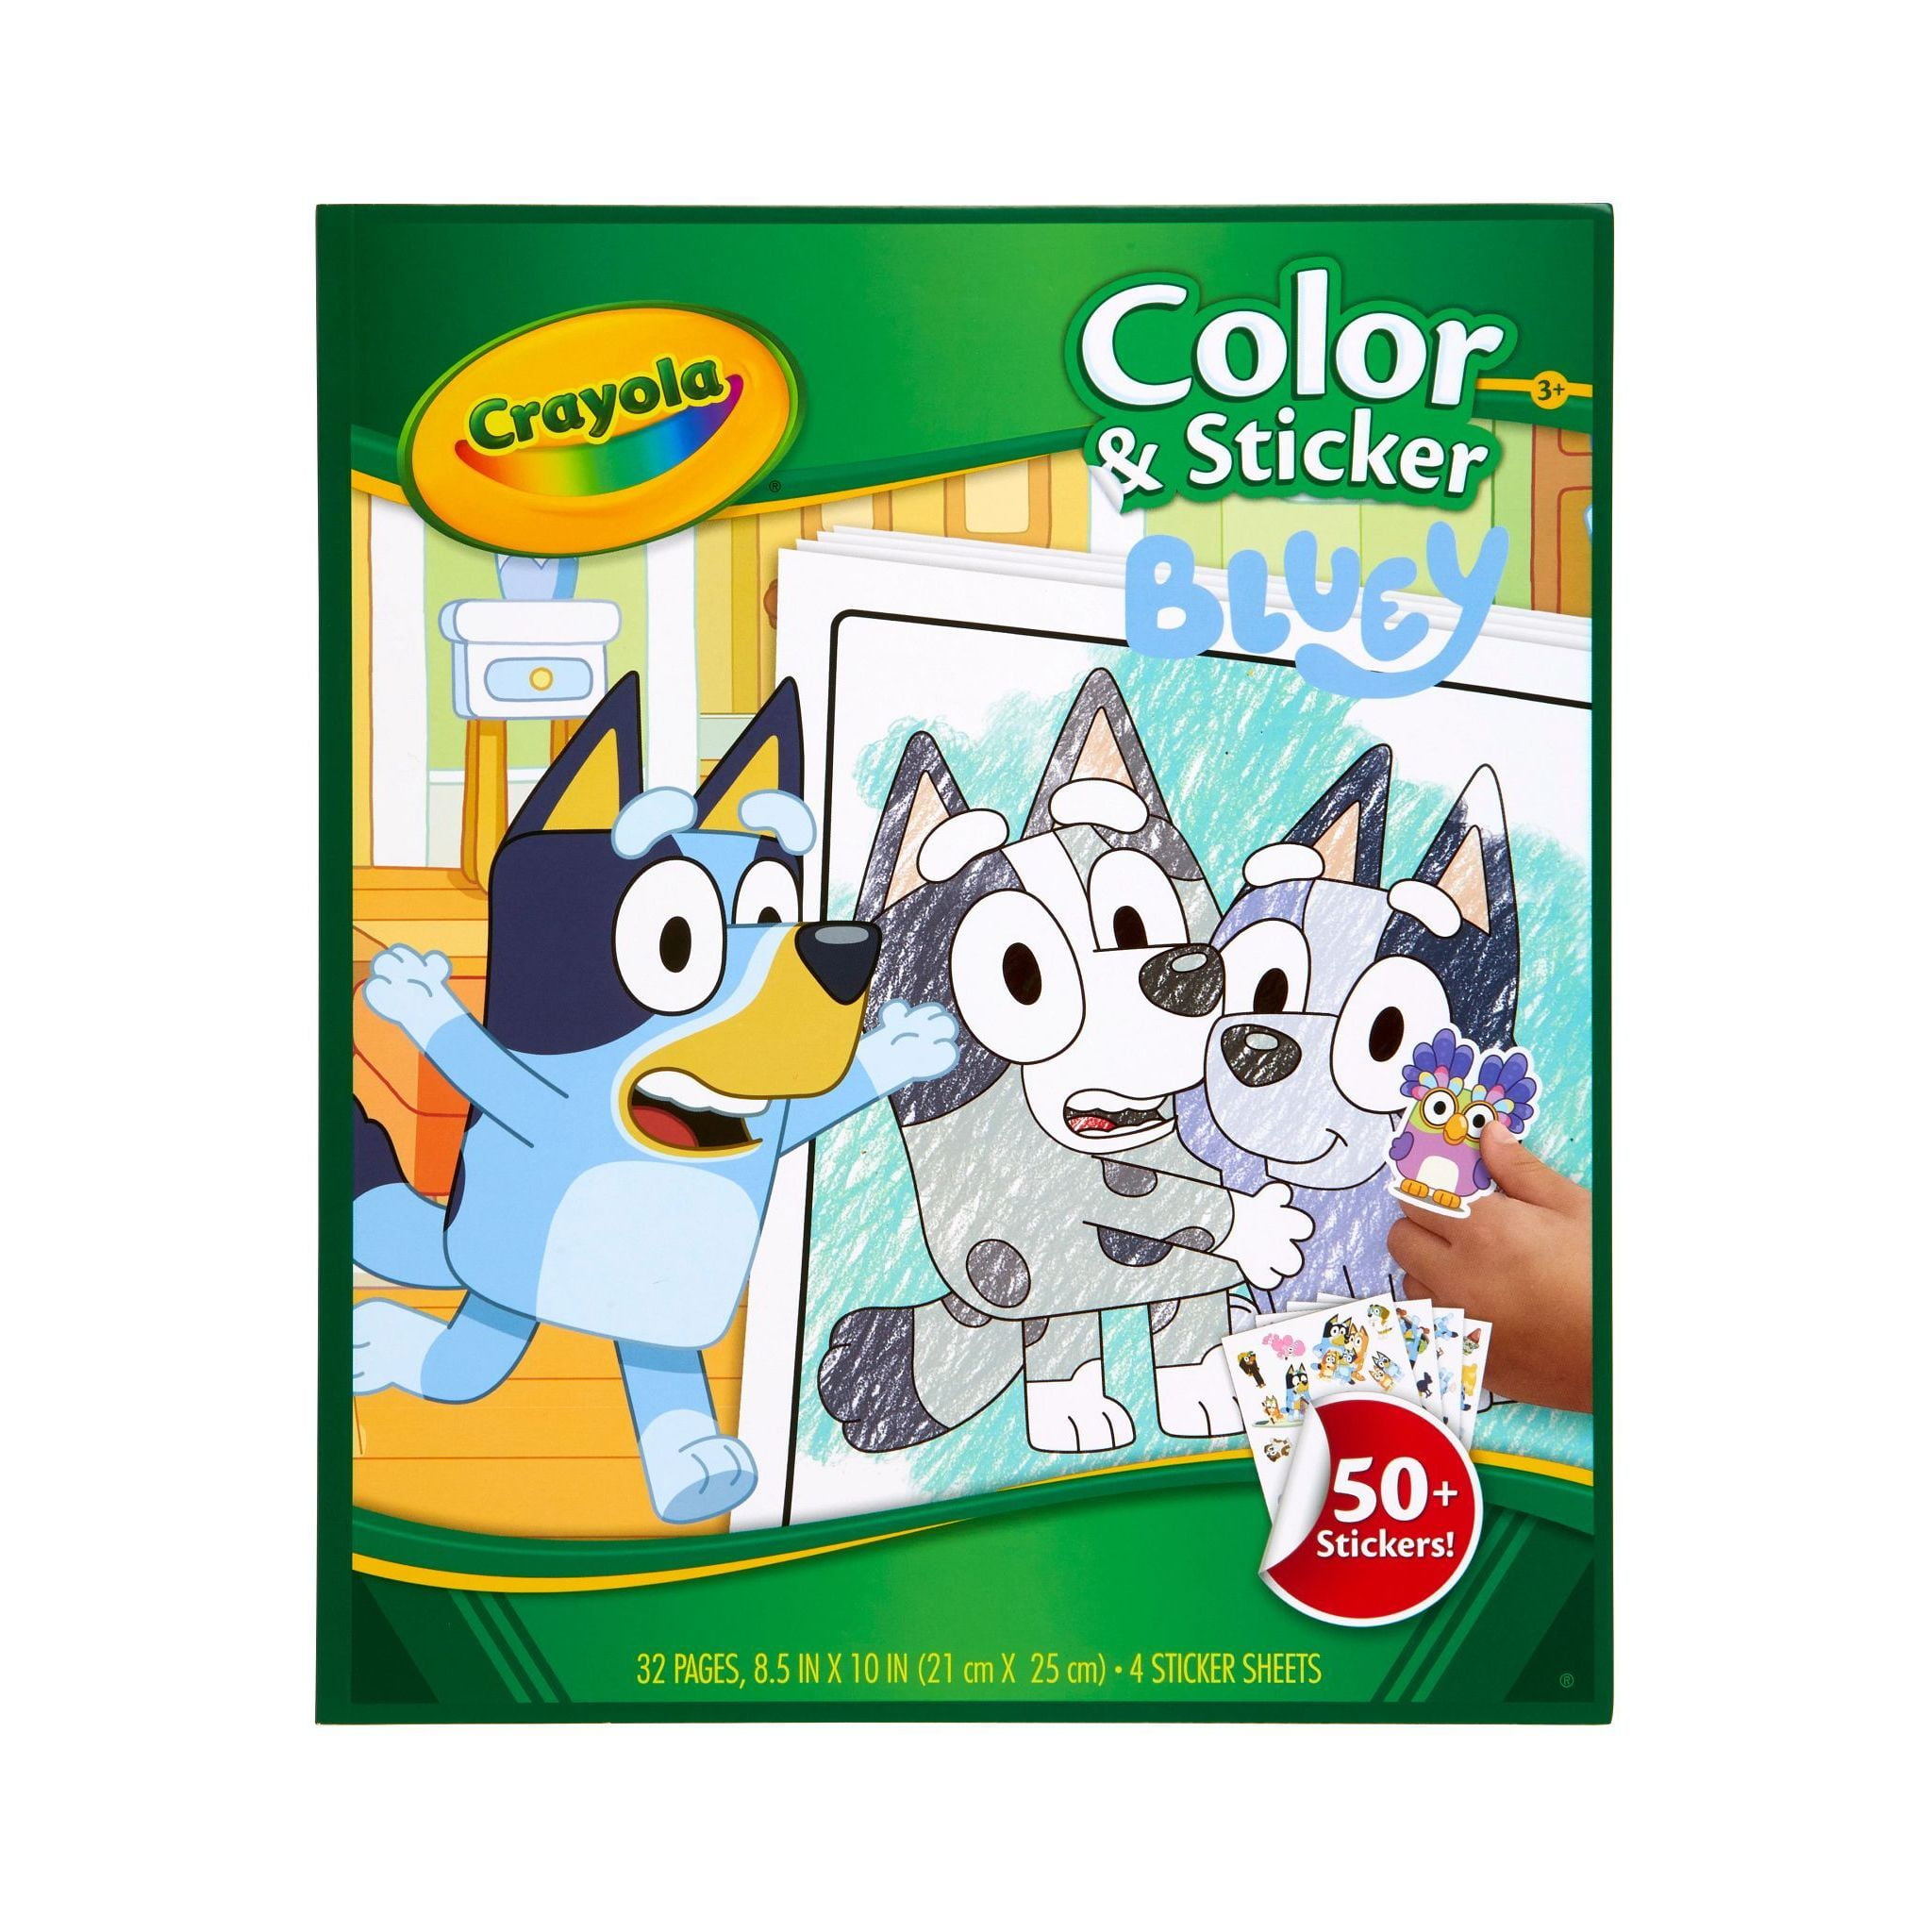 Crayola Bluey Color & Sticker Activity, Coloring Book, 32 Pages, Gift for Kids